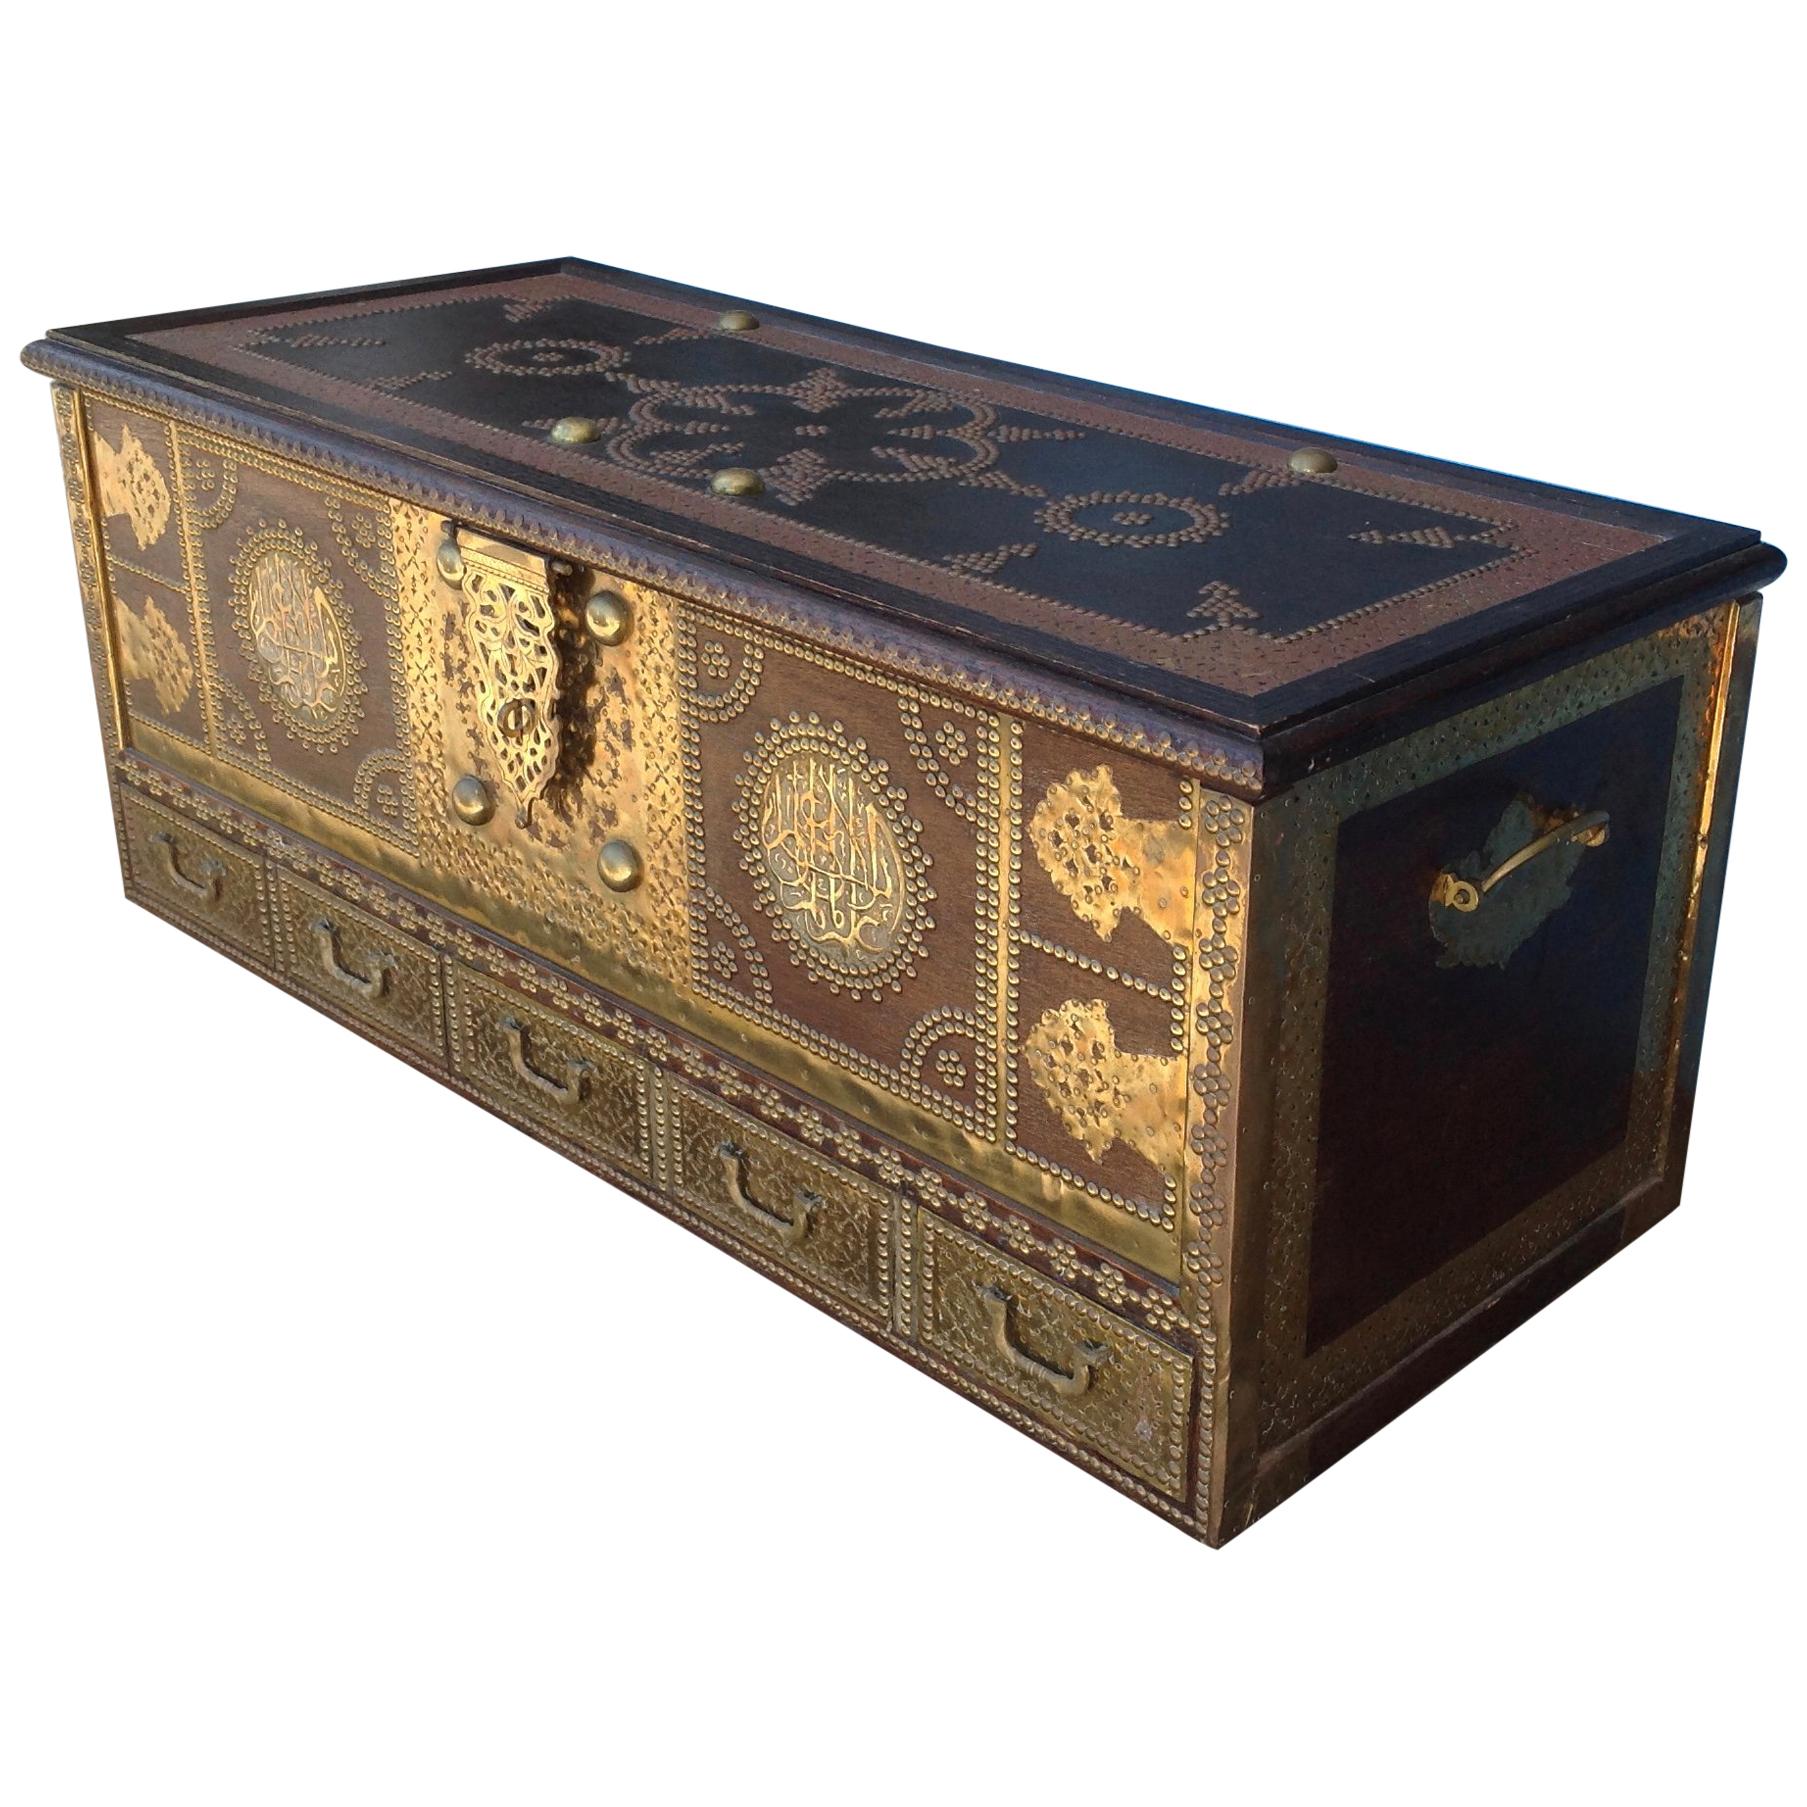 Exceptionally Elaborate Brass Appointed Moroccan Trunk